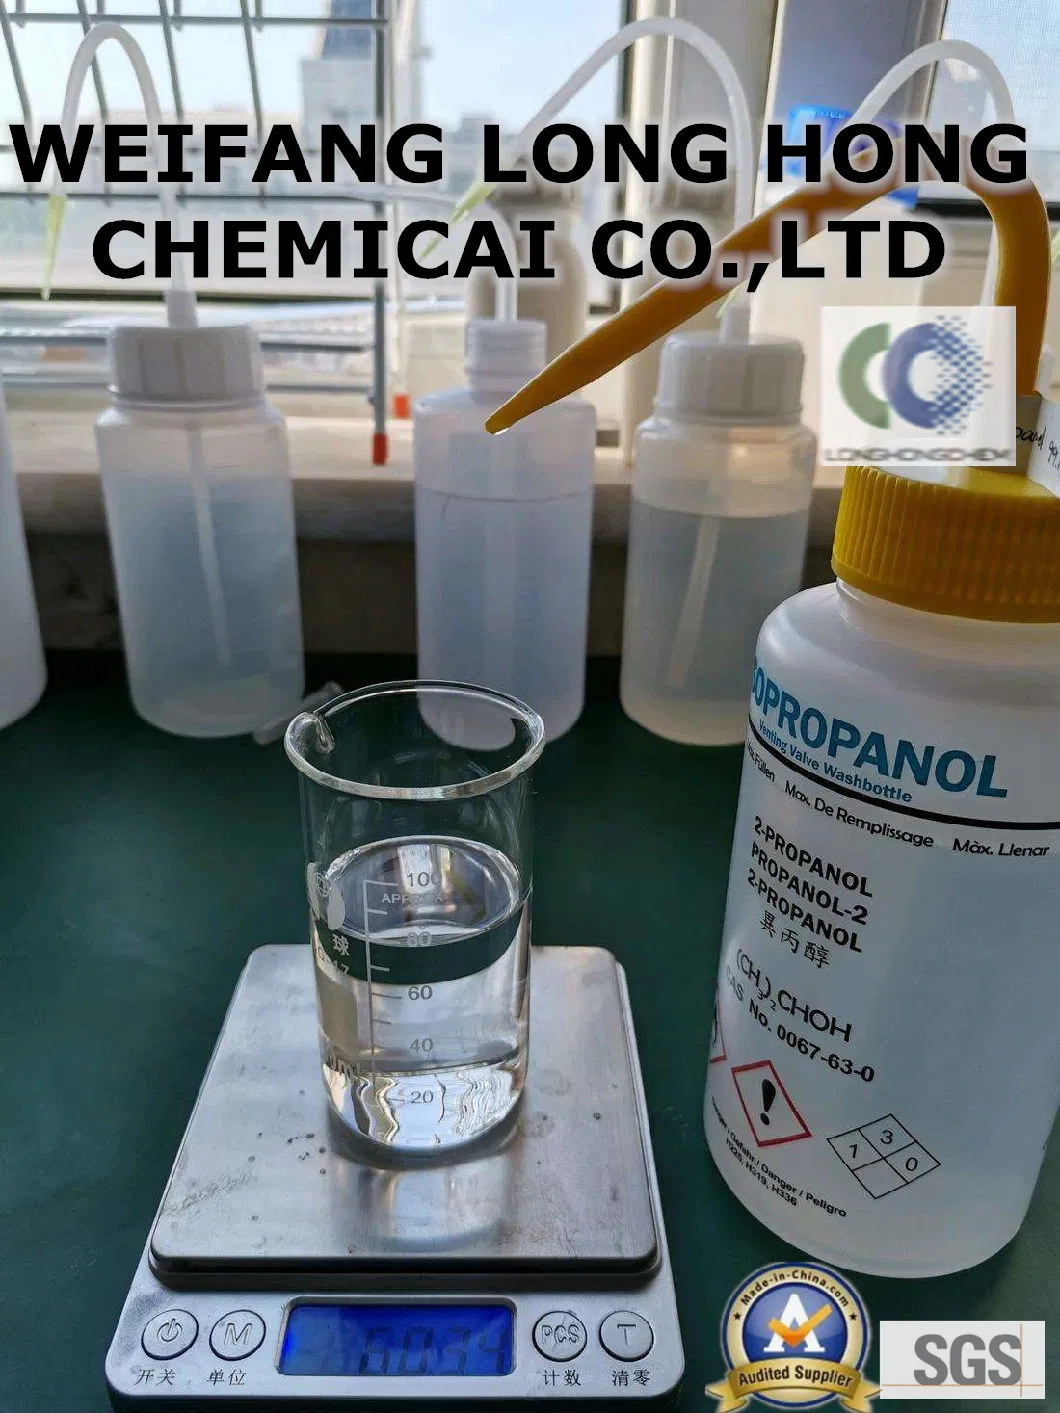 Isopropanol as Defoamer for Water Based Fracturing Fluid in Oil Wells/ in Electronic Industry, It Can Be Used as Cleaning and Degreasing Agent